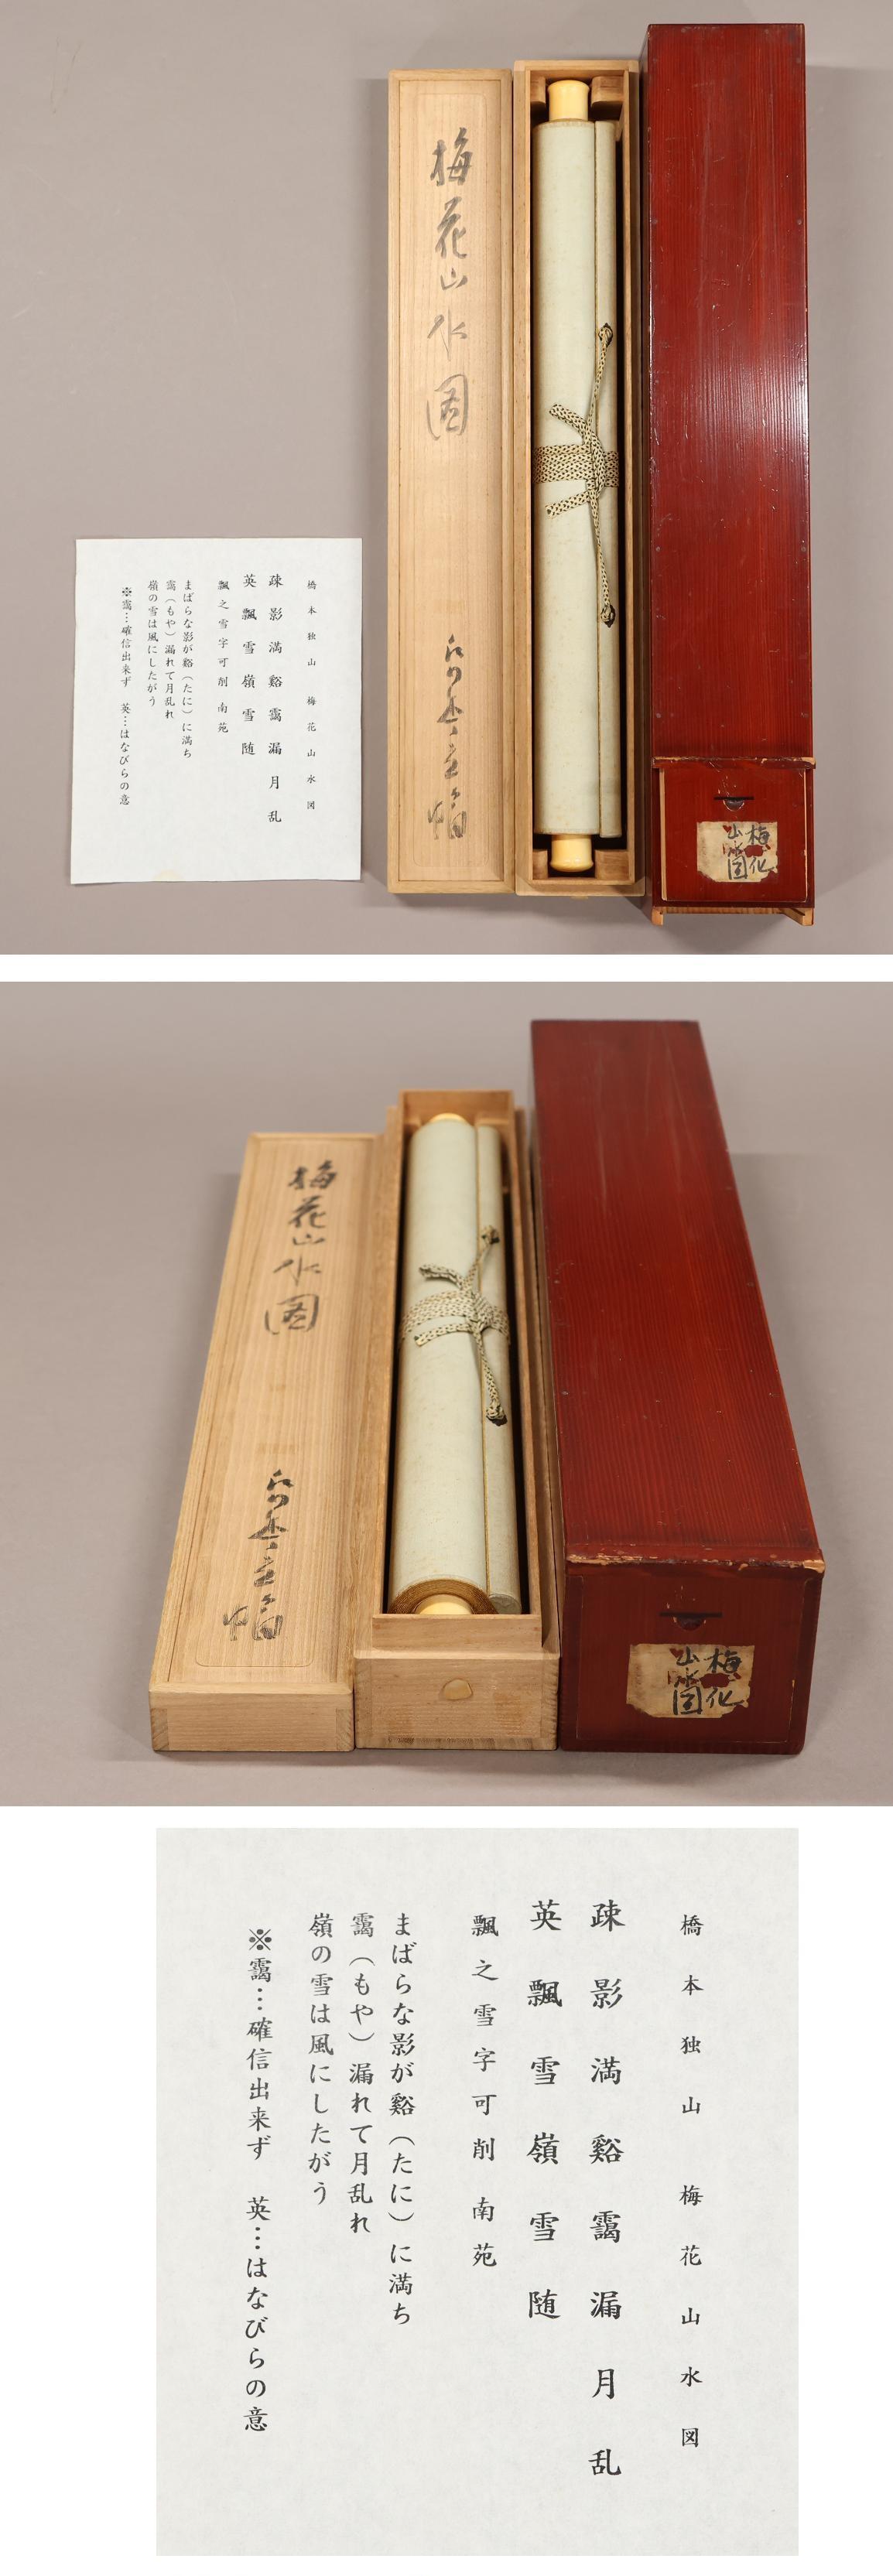 Japanese Painting Meiji / Taisho Period Scroll by Dokuzan Hashimoto Zen Buddhism In Good Condition For Sale In Amsterdam, Noord Holland